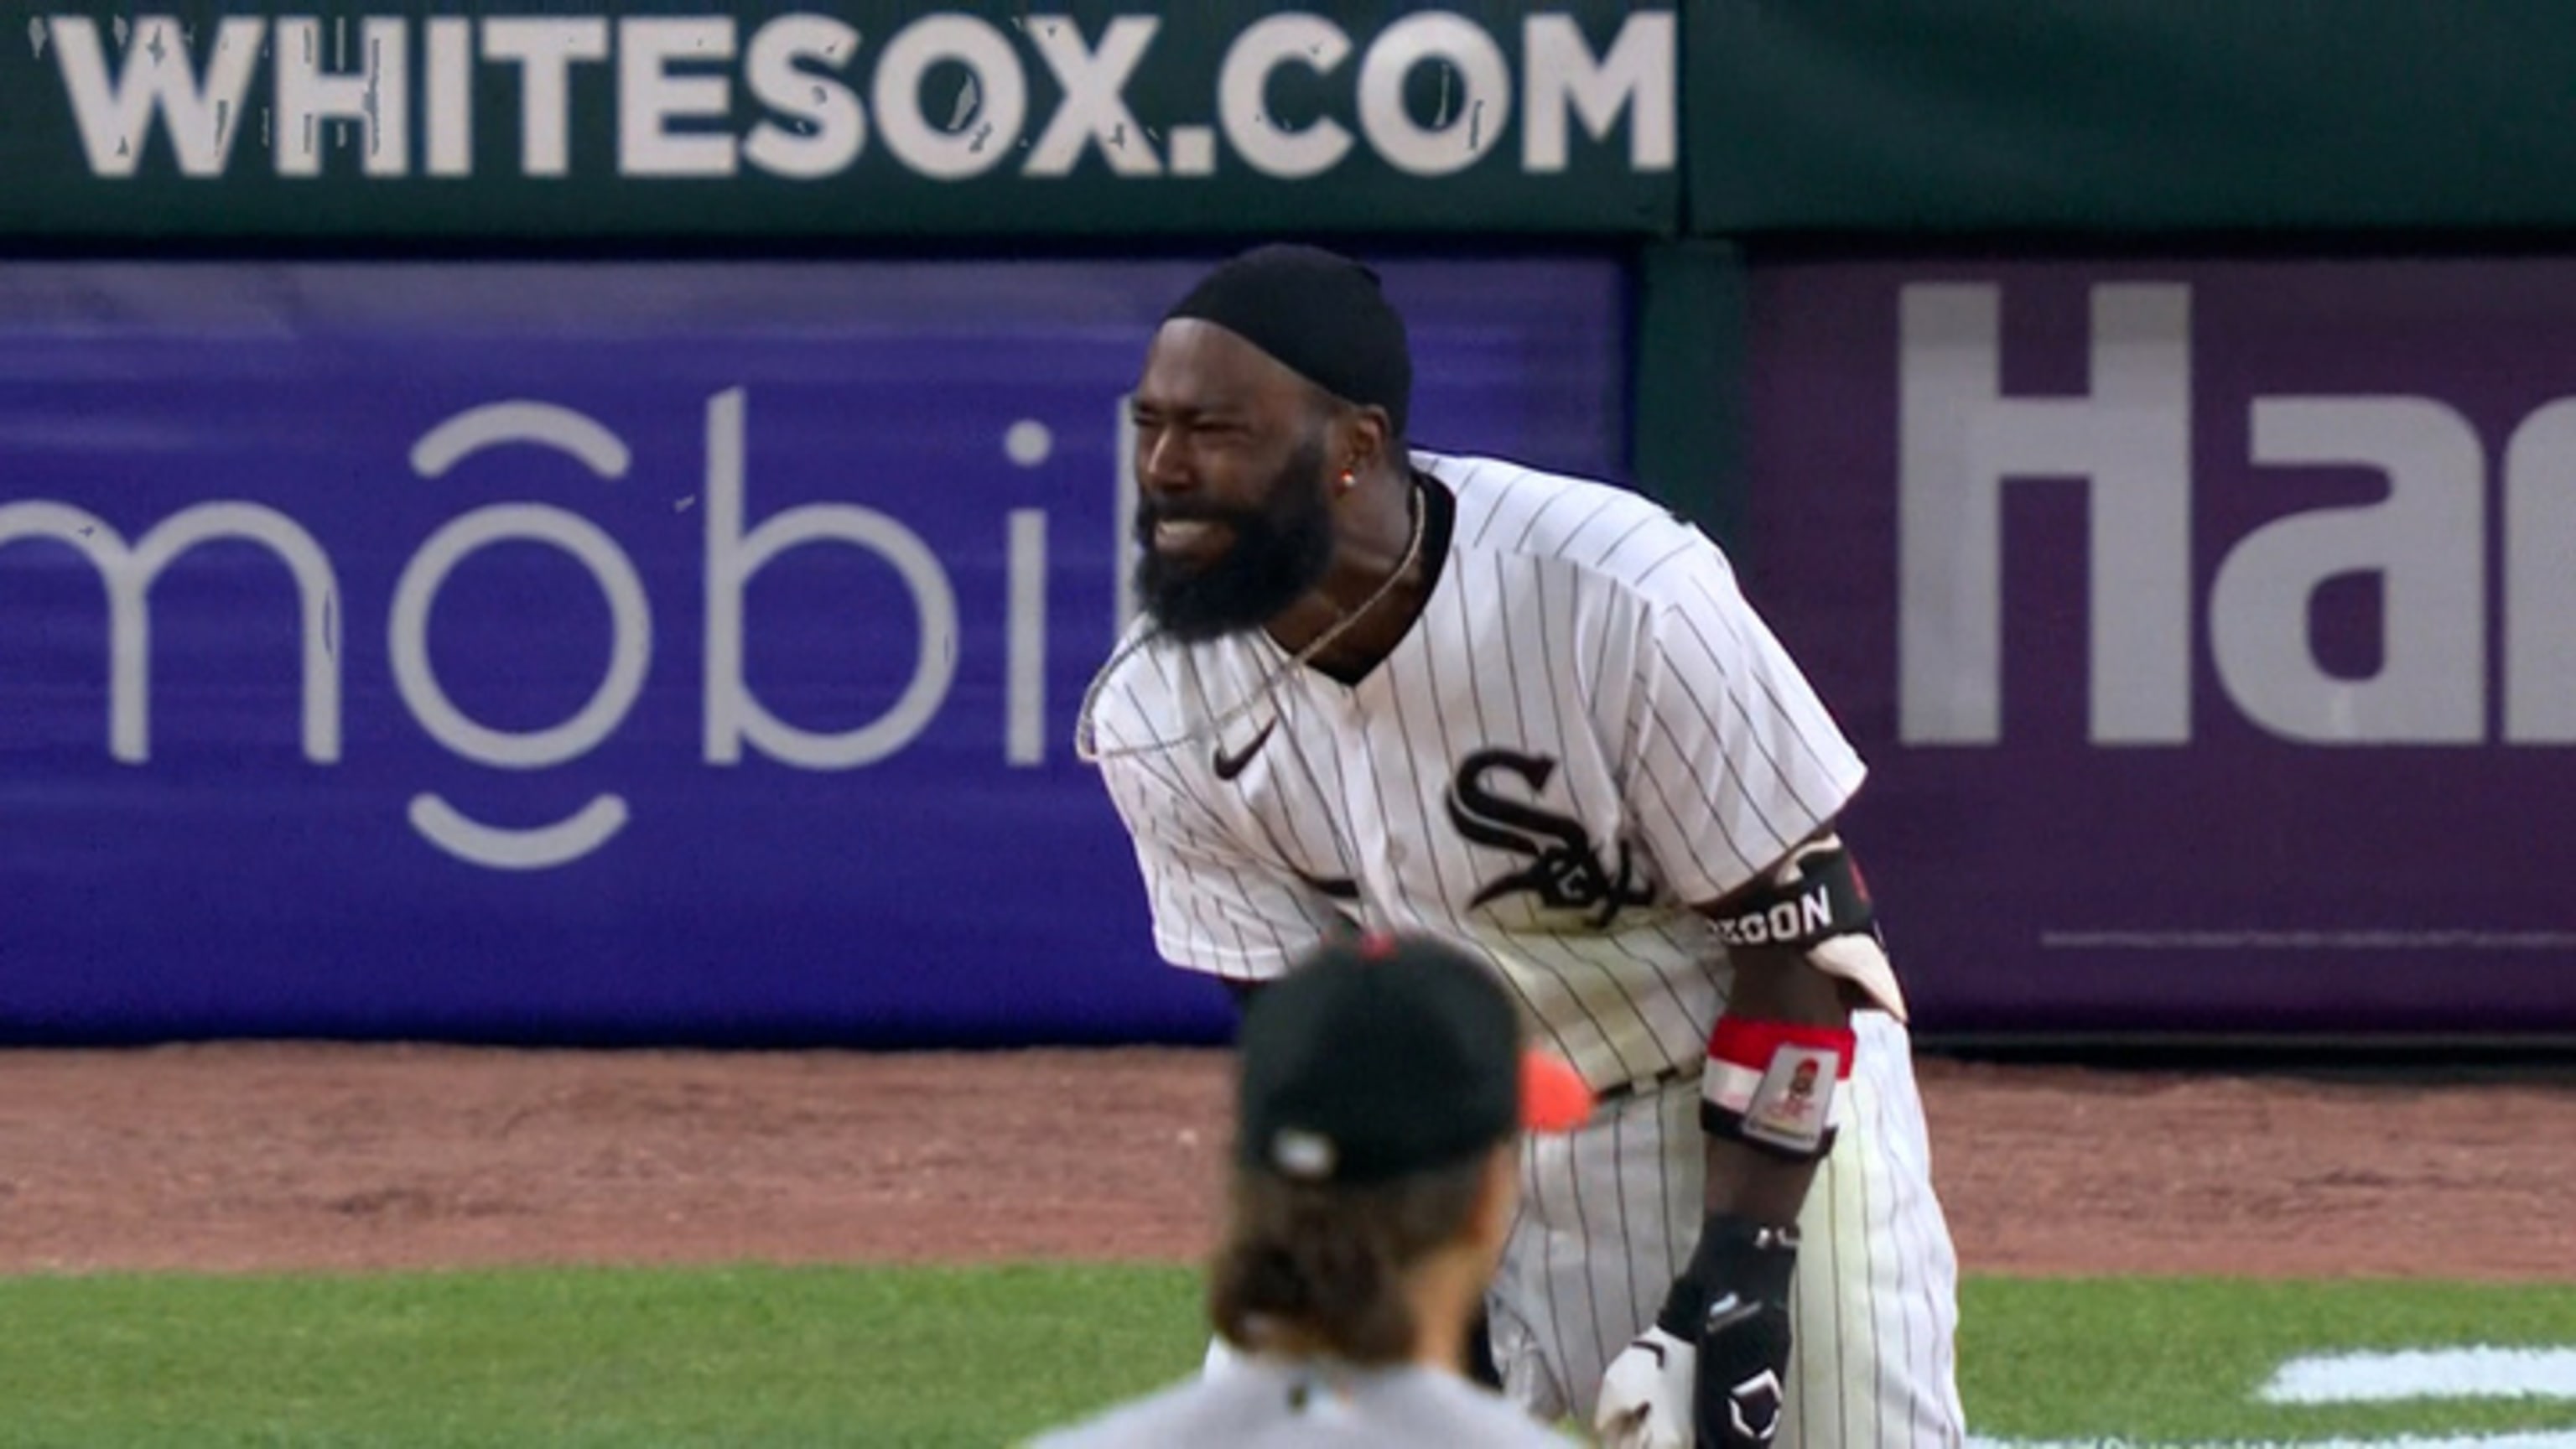 Sox lack big hit in 2-1 loss to O's in opener